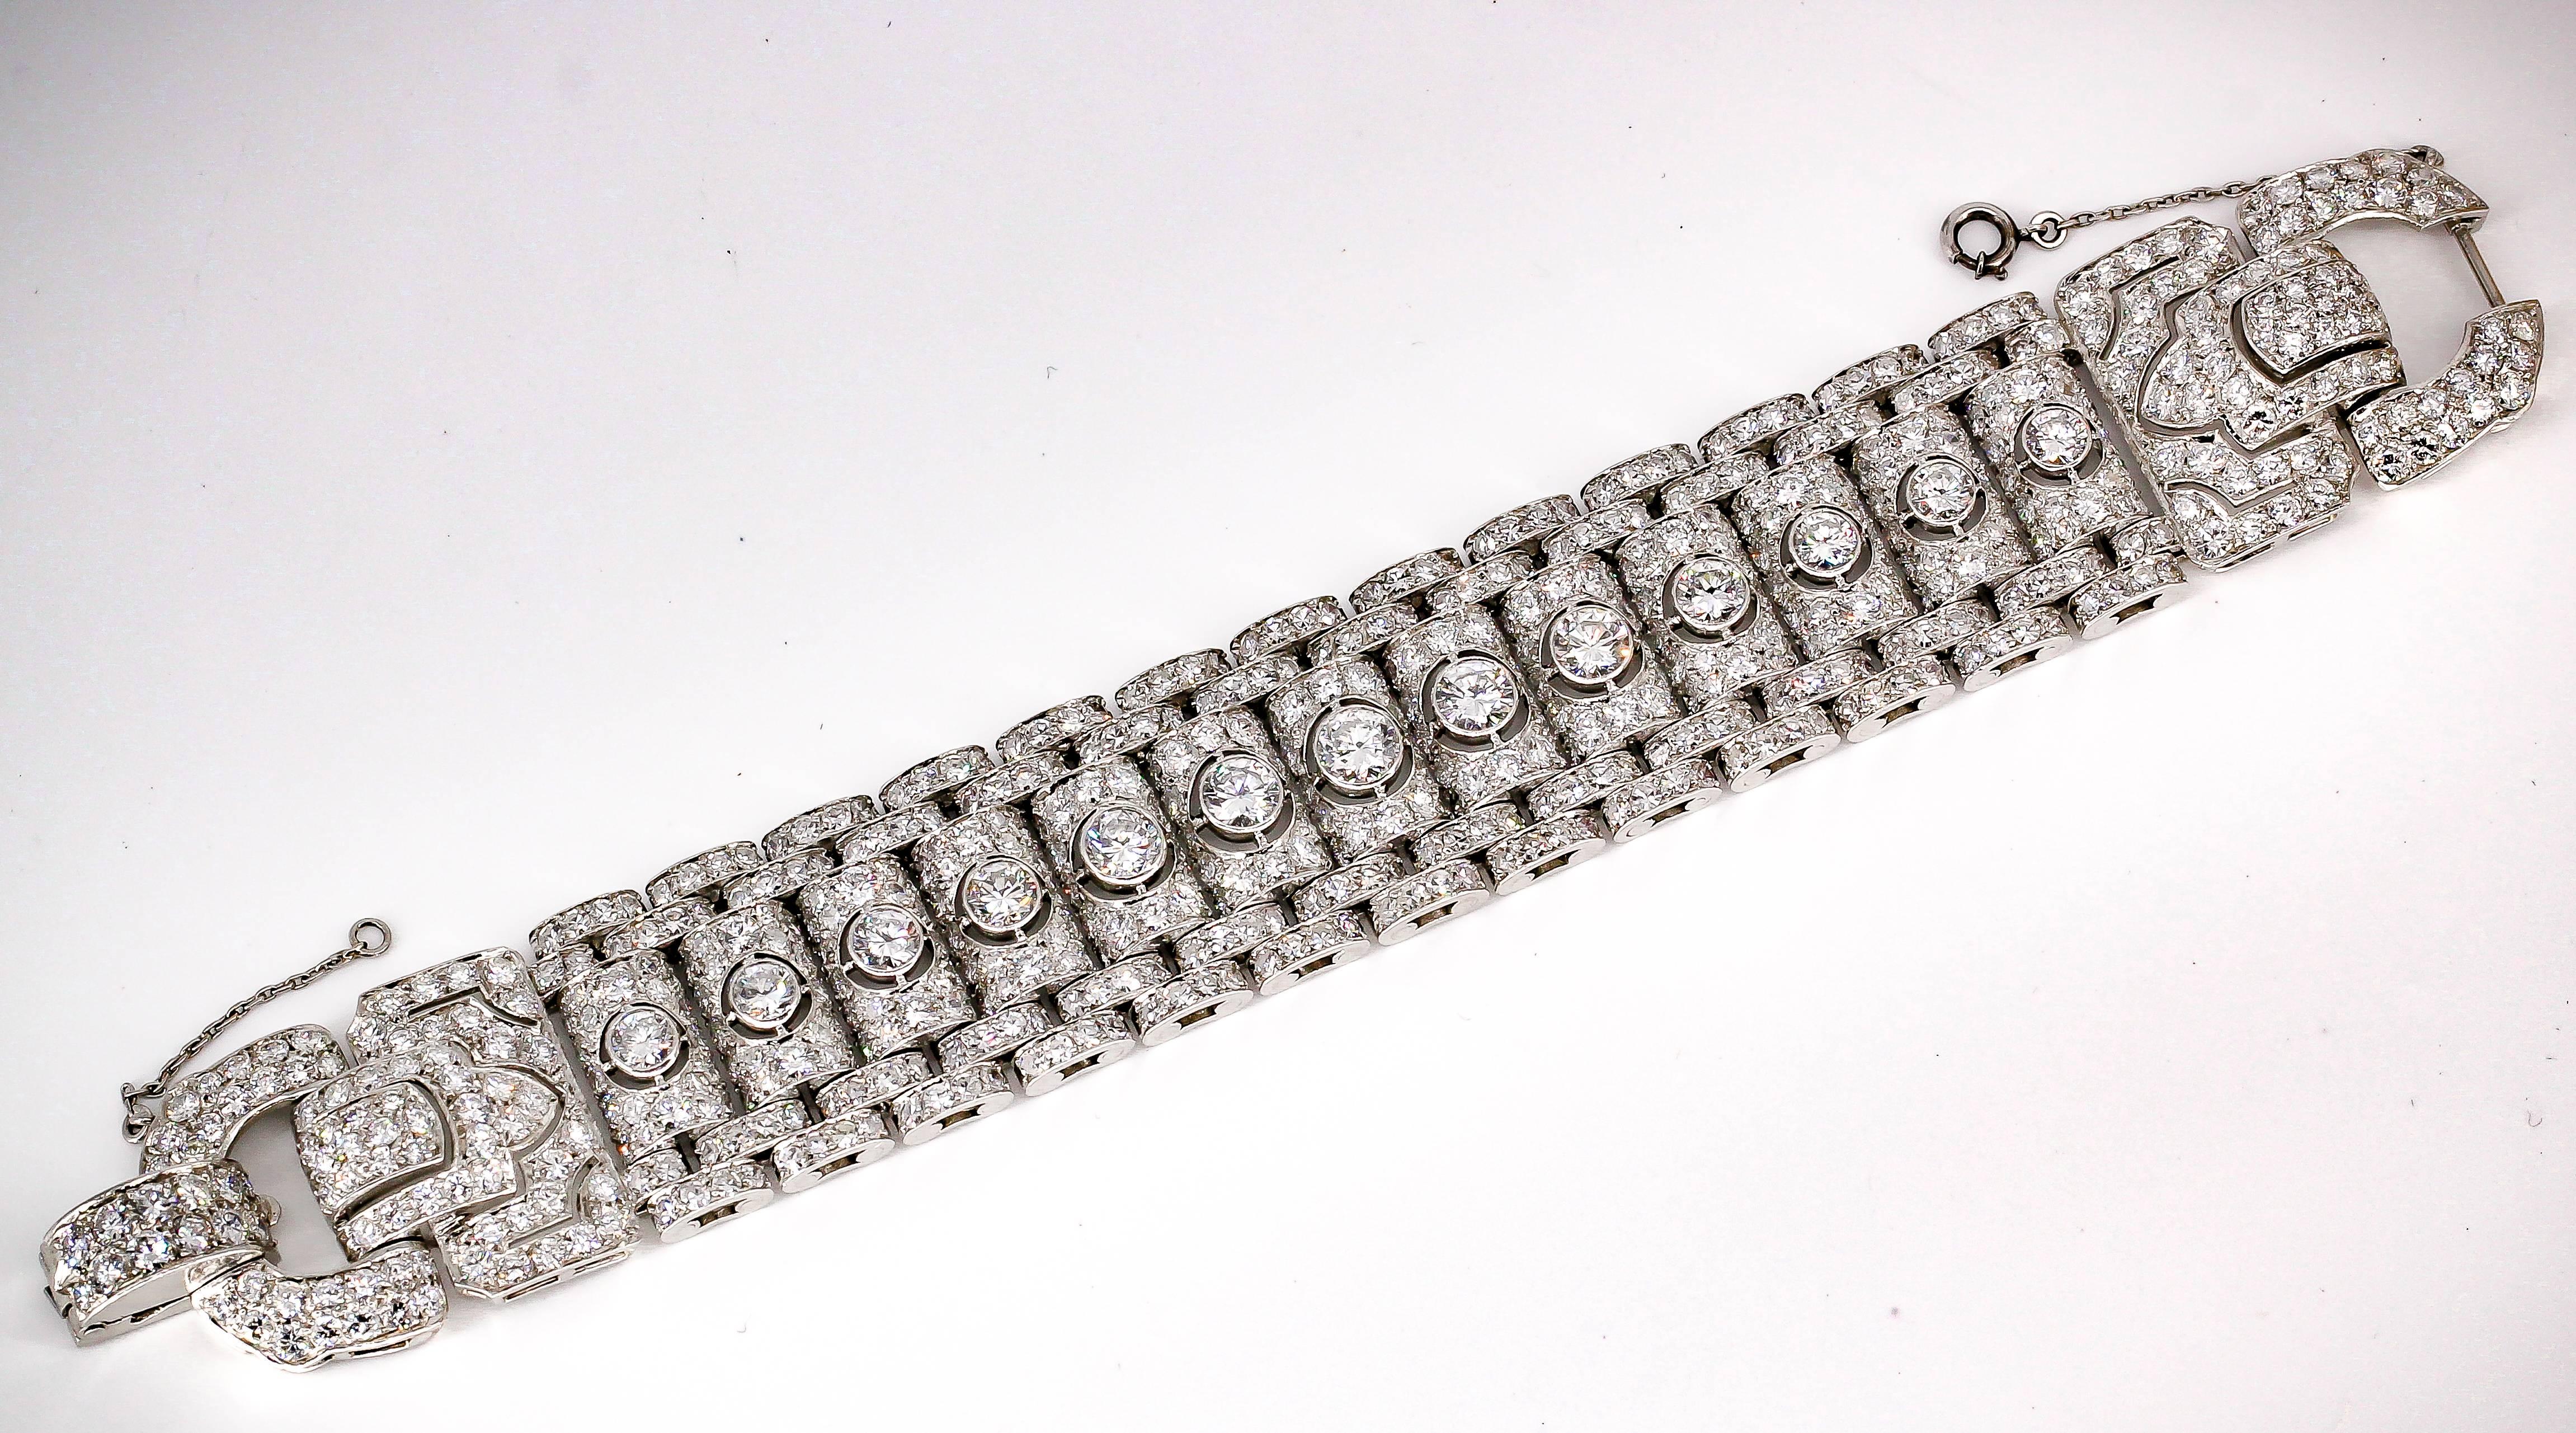 Exceptional diamond and platinum buckle bracelet, circa 1930s. It features high grade round brilliant cut diamonds throughout, approx. 30cts total weight. Superb workmanship and style give this bracelet great presence anywhere you go.